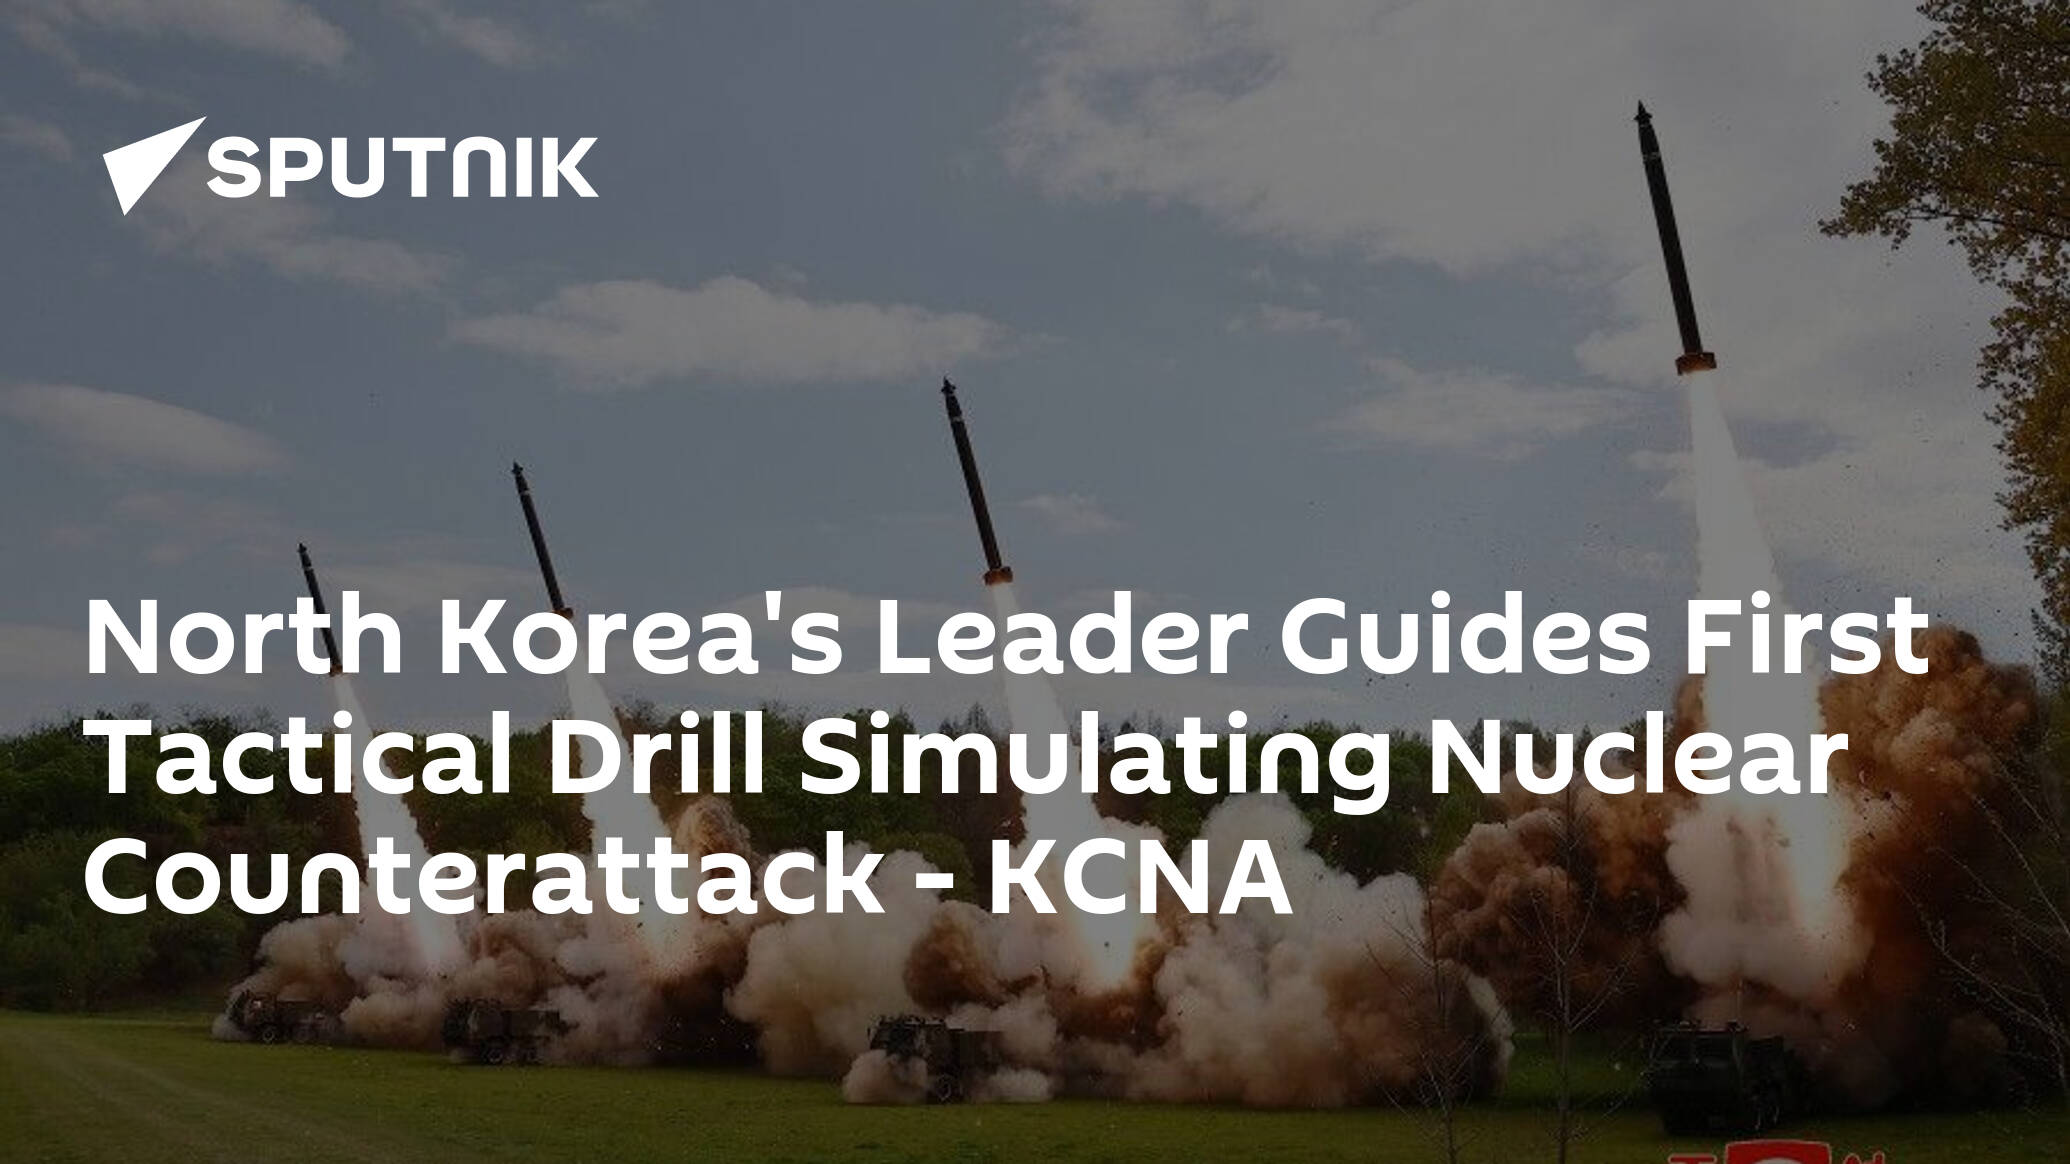 North Korea's Leader Guides First Tactical Drill Simulating Nuclear Counterattack – KCNA